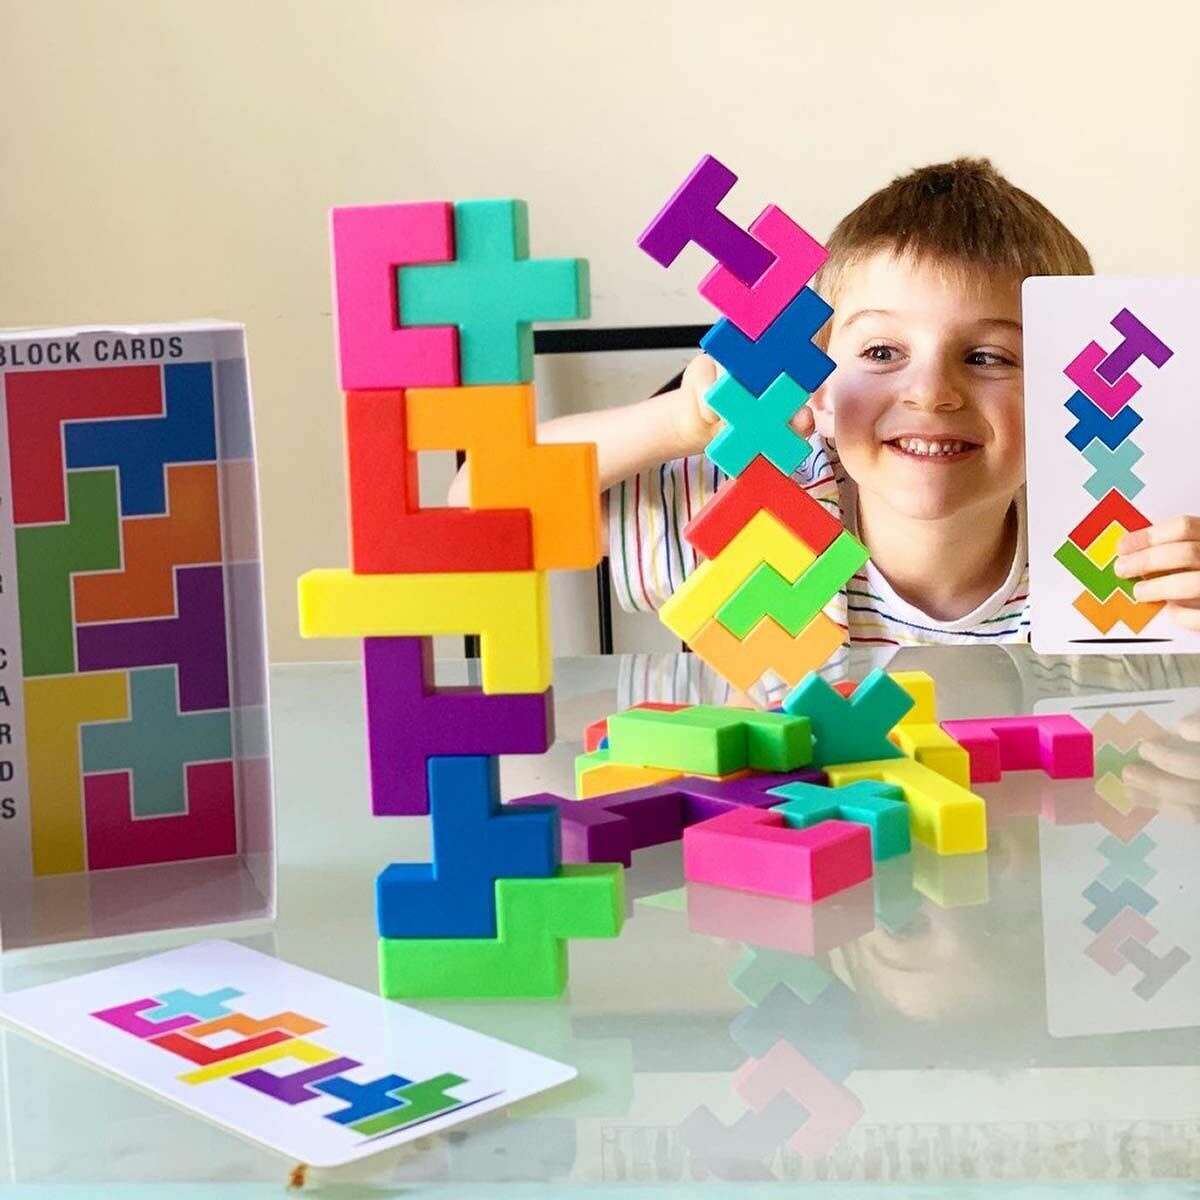 The block-building game Buildzi is the company’s newest offering.